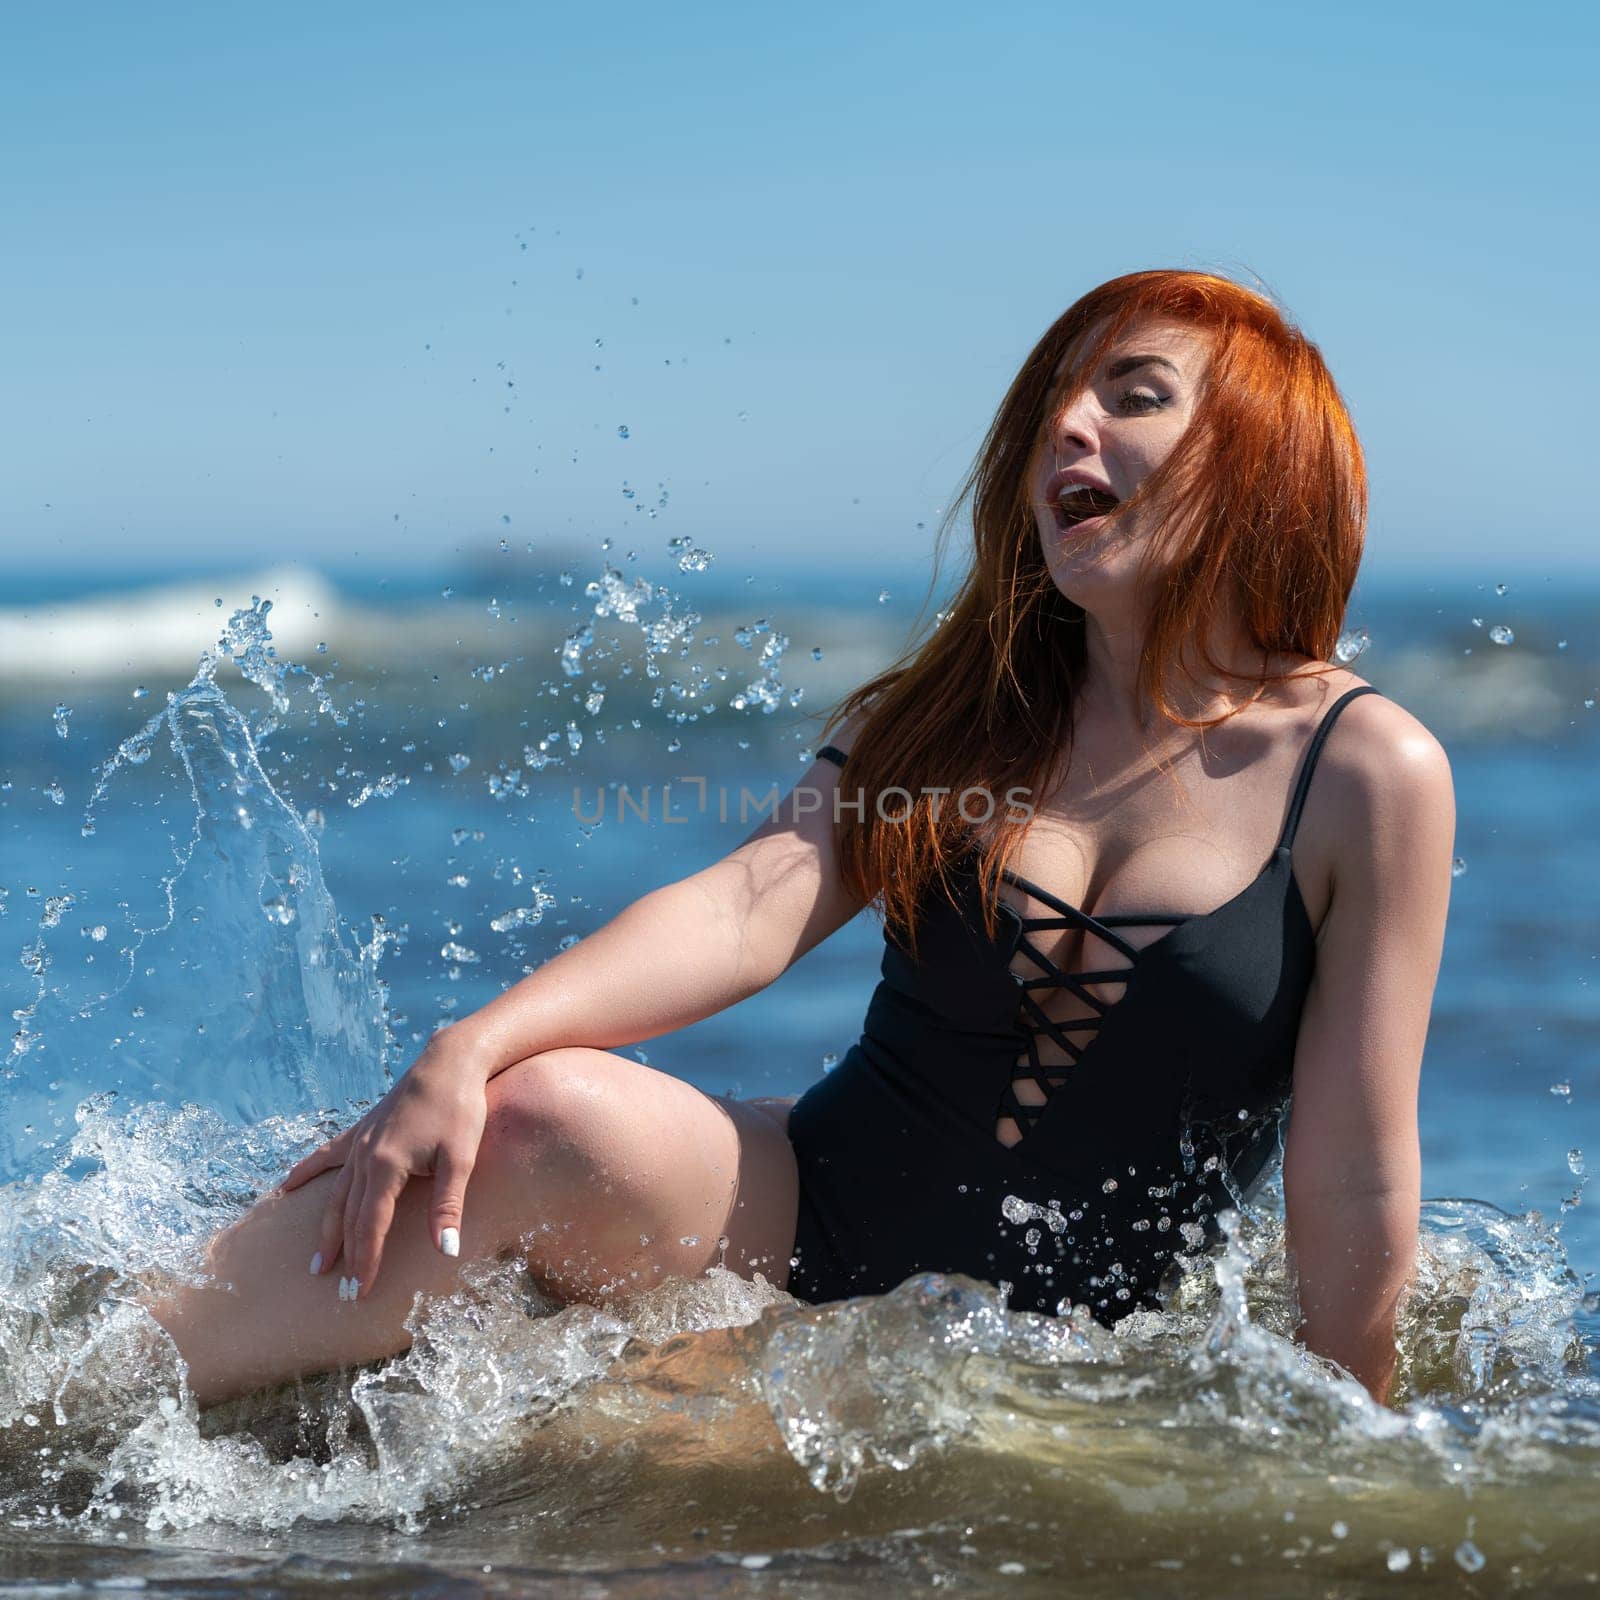 Enthusiastic playful and curvy redhead woman in black one piece swimsuit swimming and enjoying beach holiday. Her facial expression is so playful, it's impossible not to feel happy just looking at her